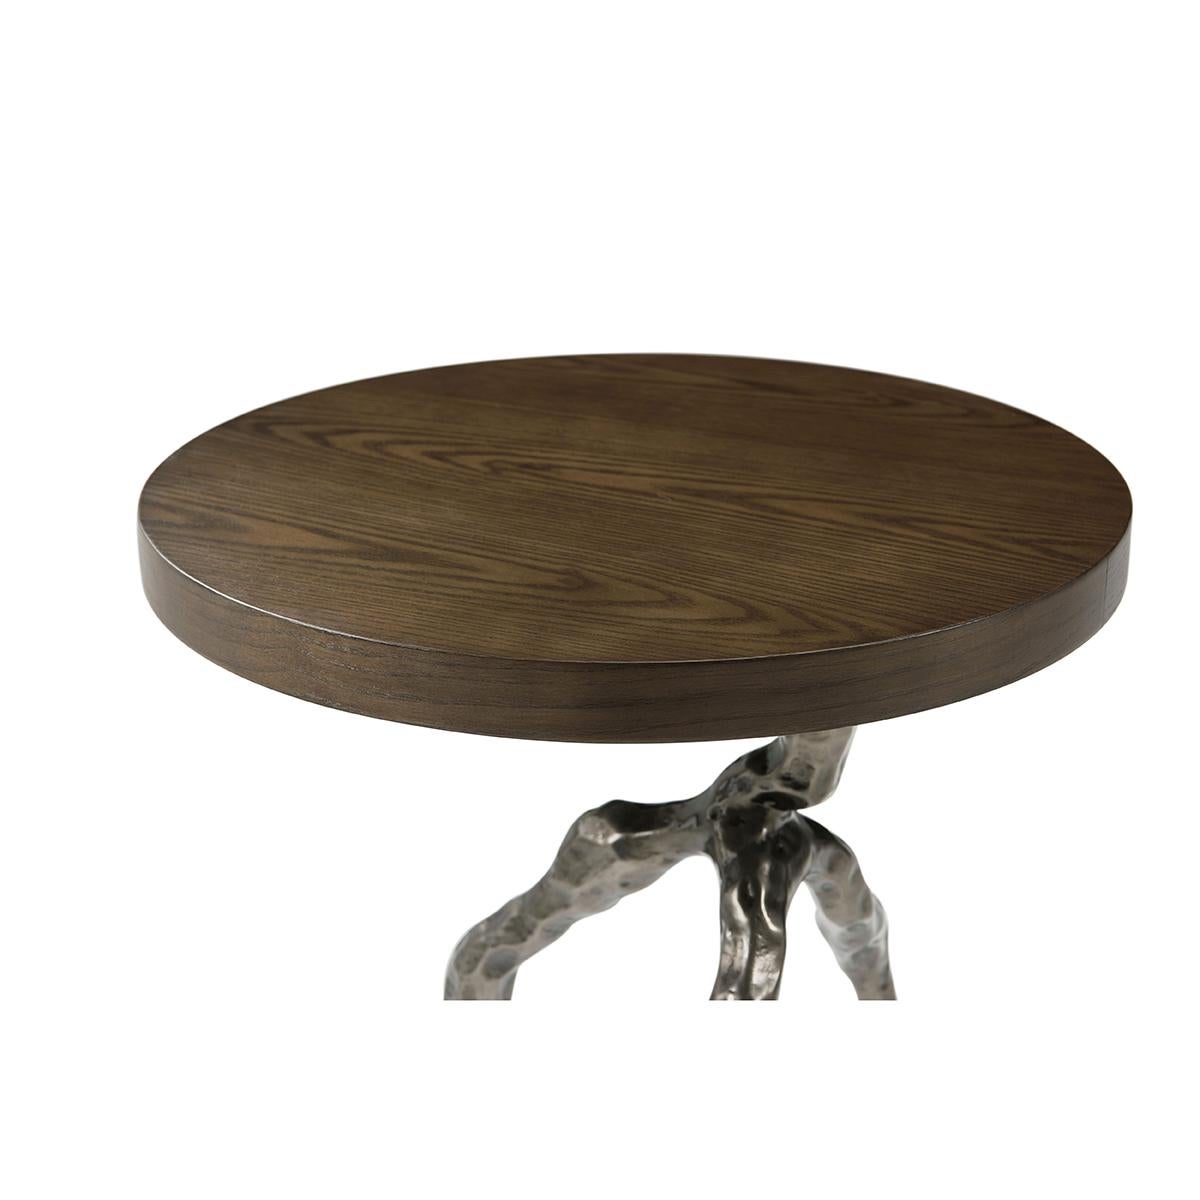 Metal Modern Faux Bois Accent Table - Earth Finish For Sale